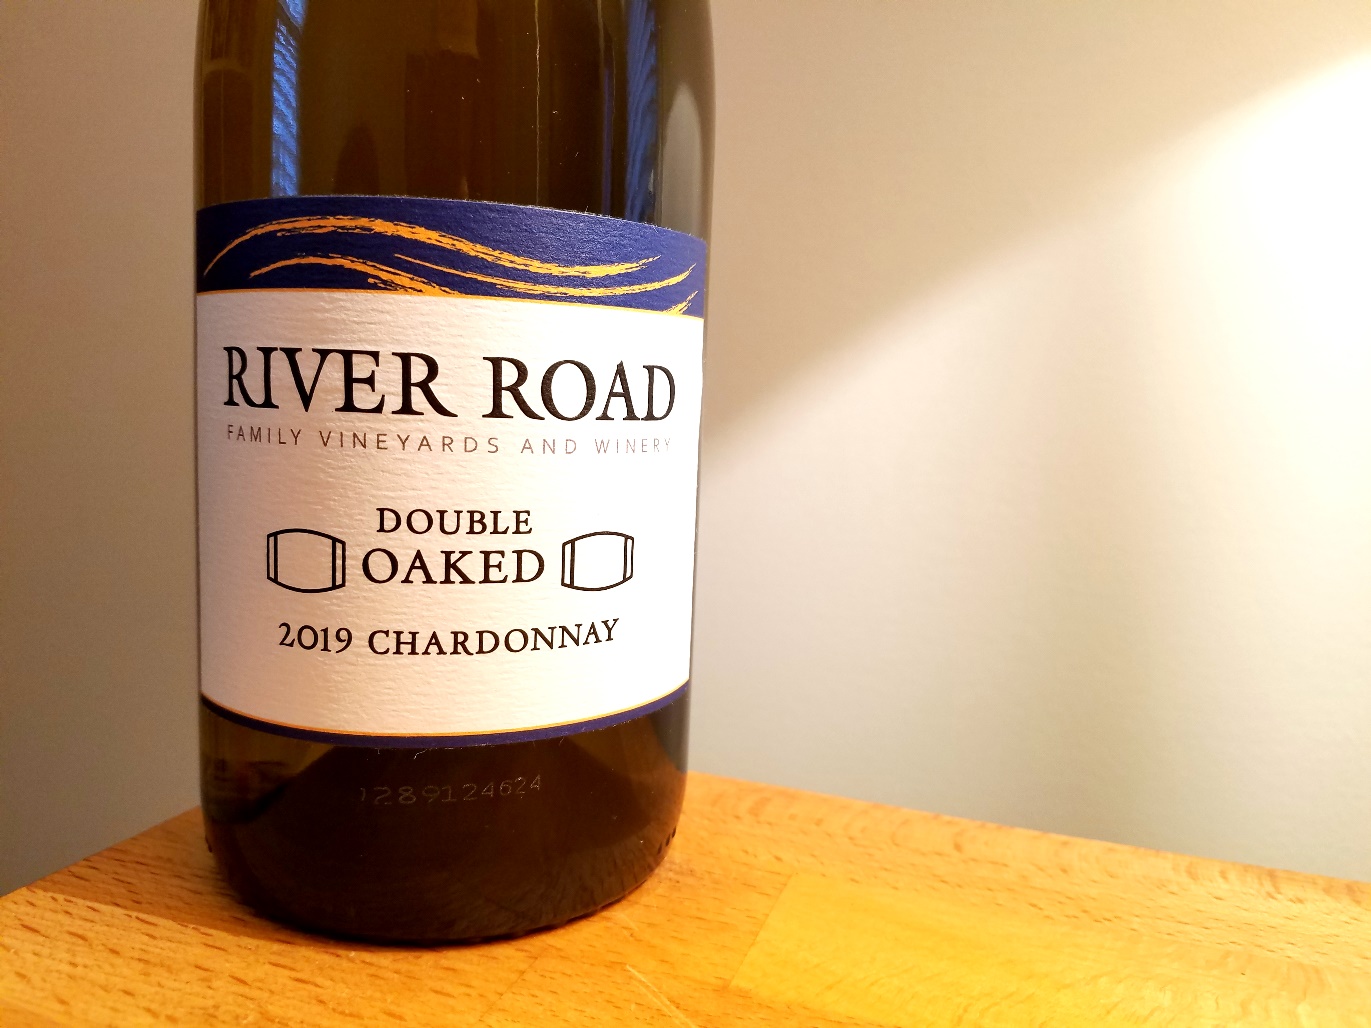 River Road Family Vineyards and Winery, Double Oaked Chardonnay 2019, California, Wine Casual